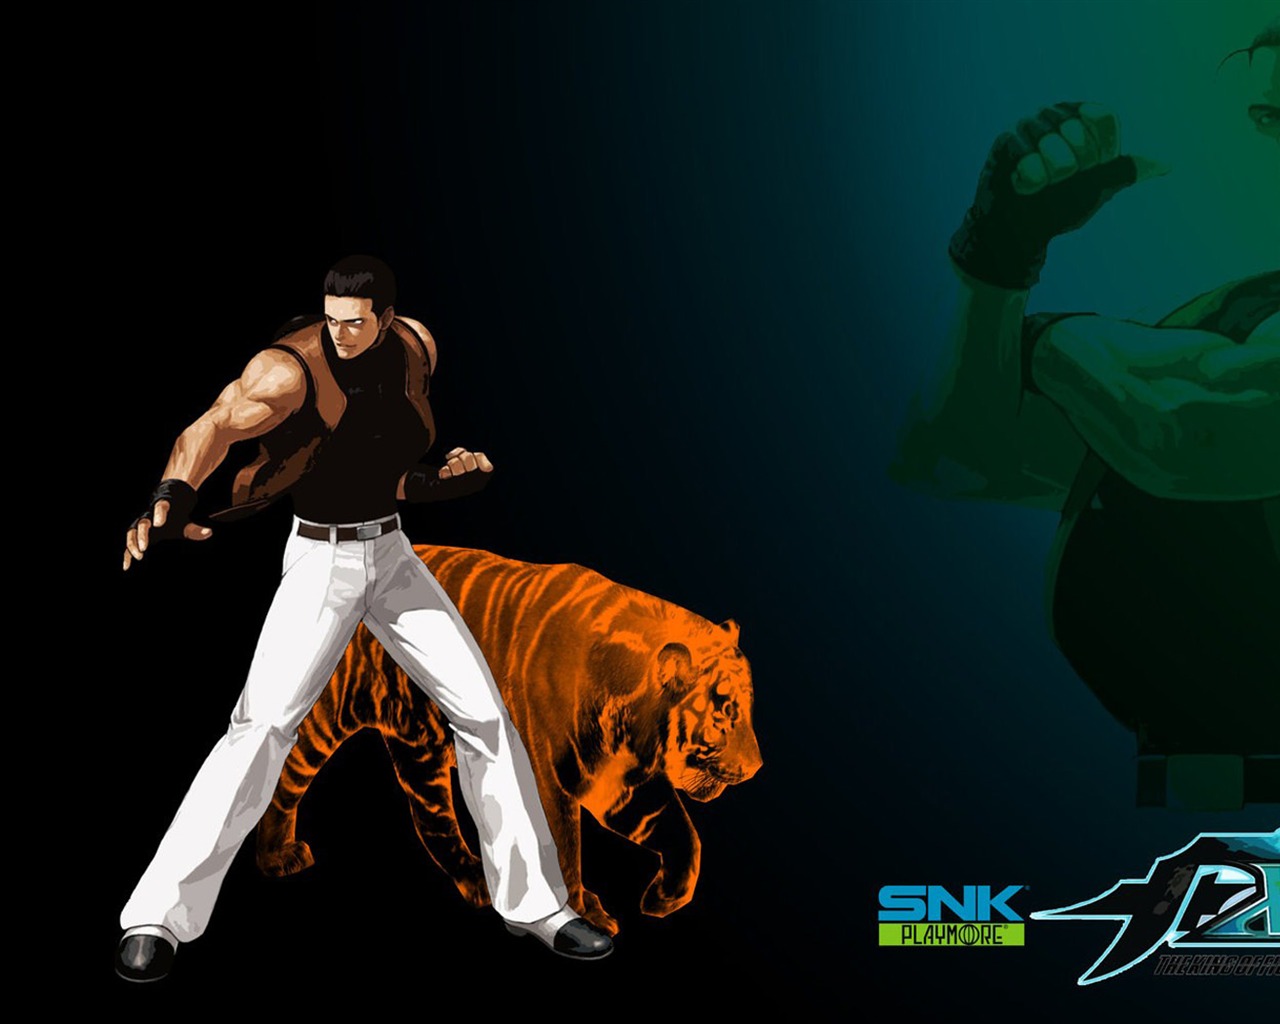 The King of Fighters XIII wallpapers #17 - 1280x1024